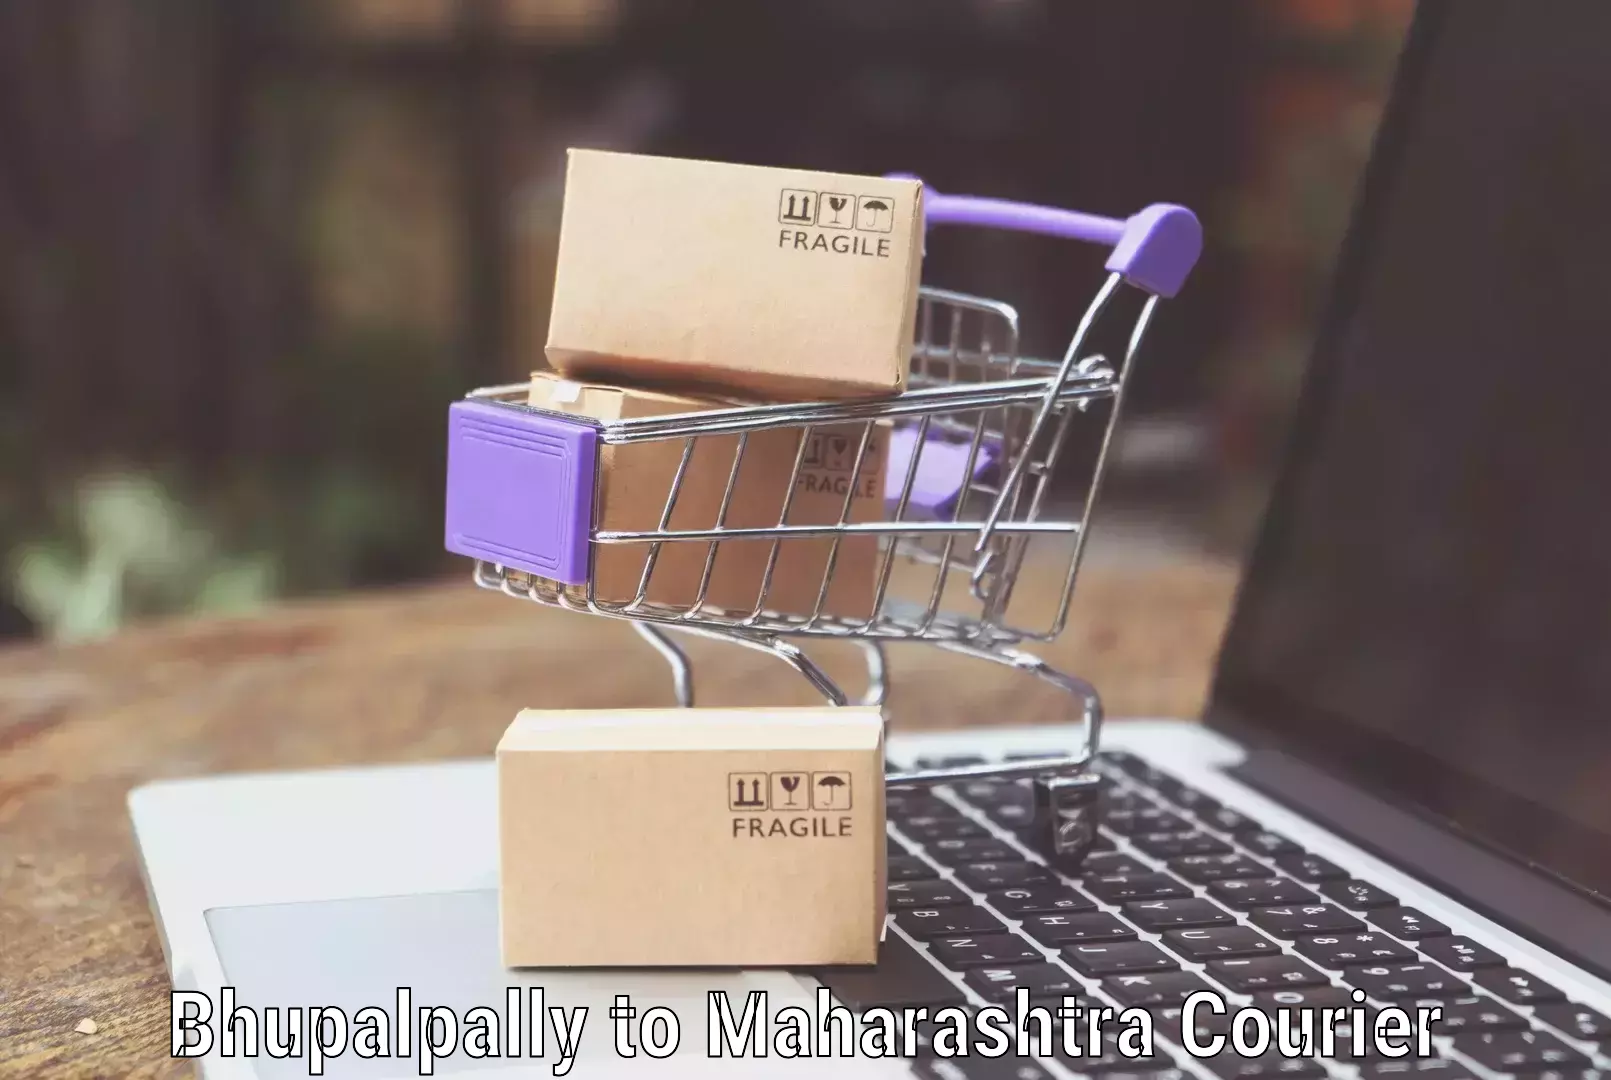 Luggage delivery network Bhupalpally to Dadar